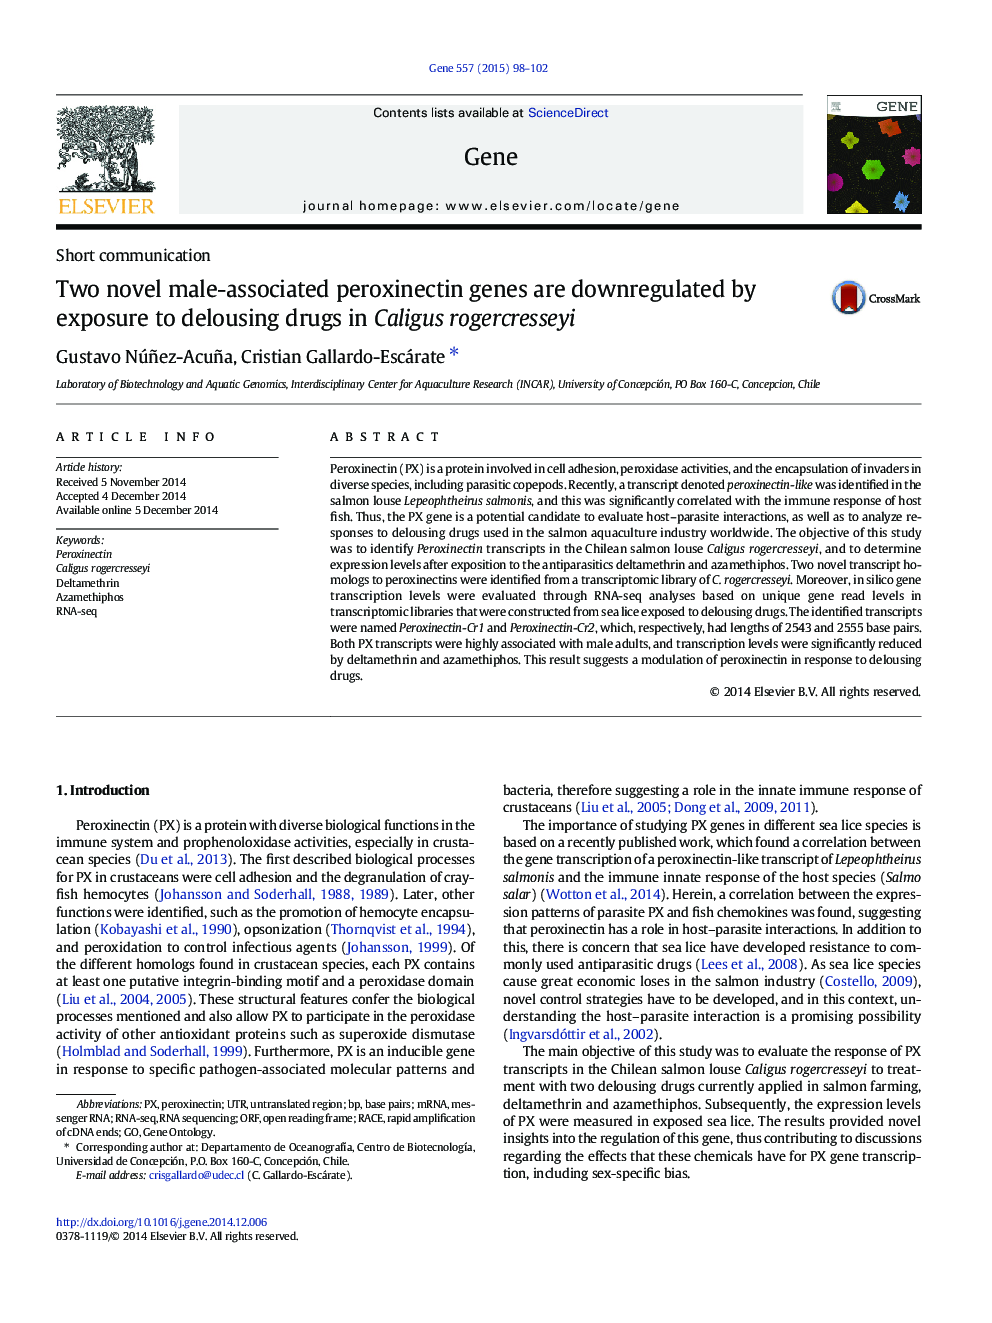 Two novel male-associated peroxinectin genes are downregulated by exposure to delousing drugs in Caligus rogercresseyi